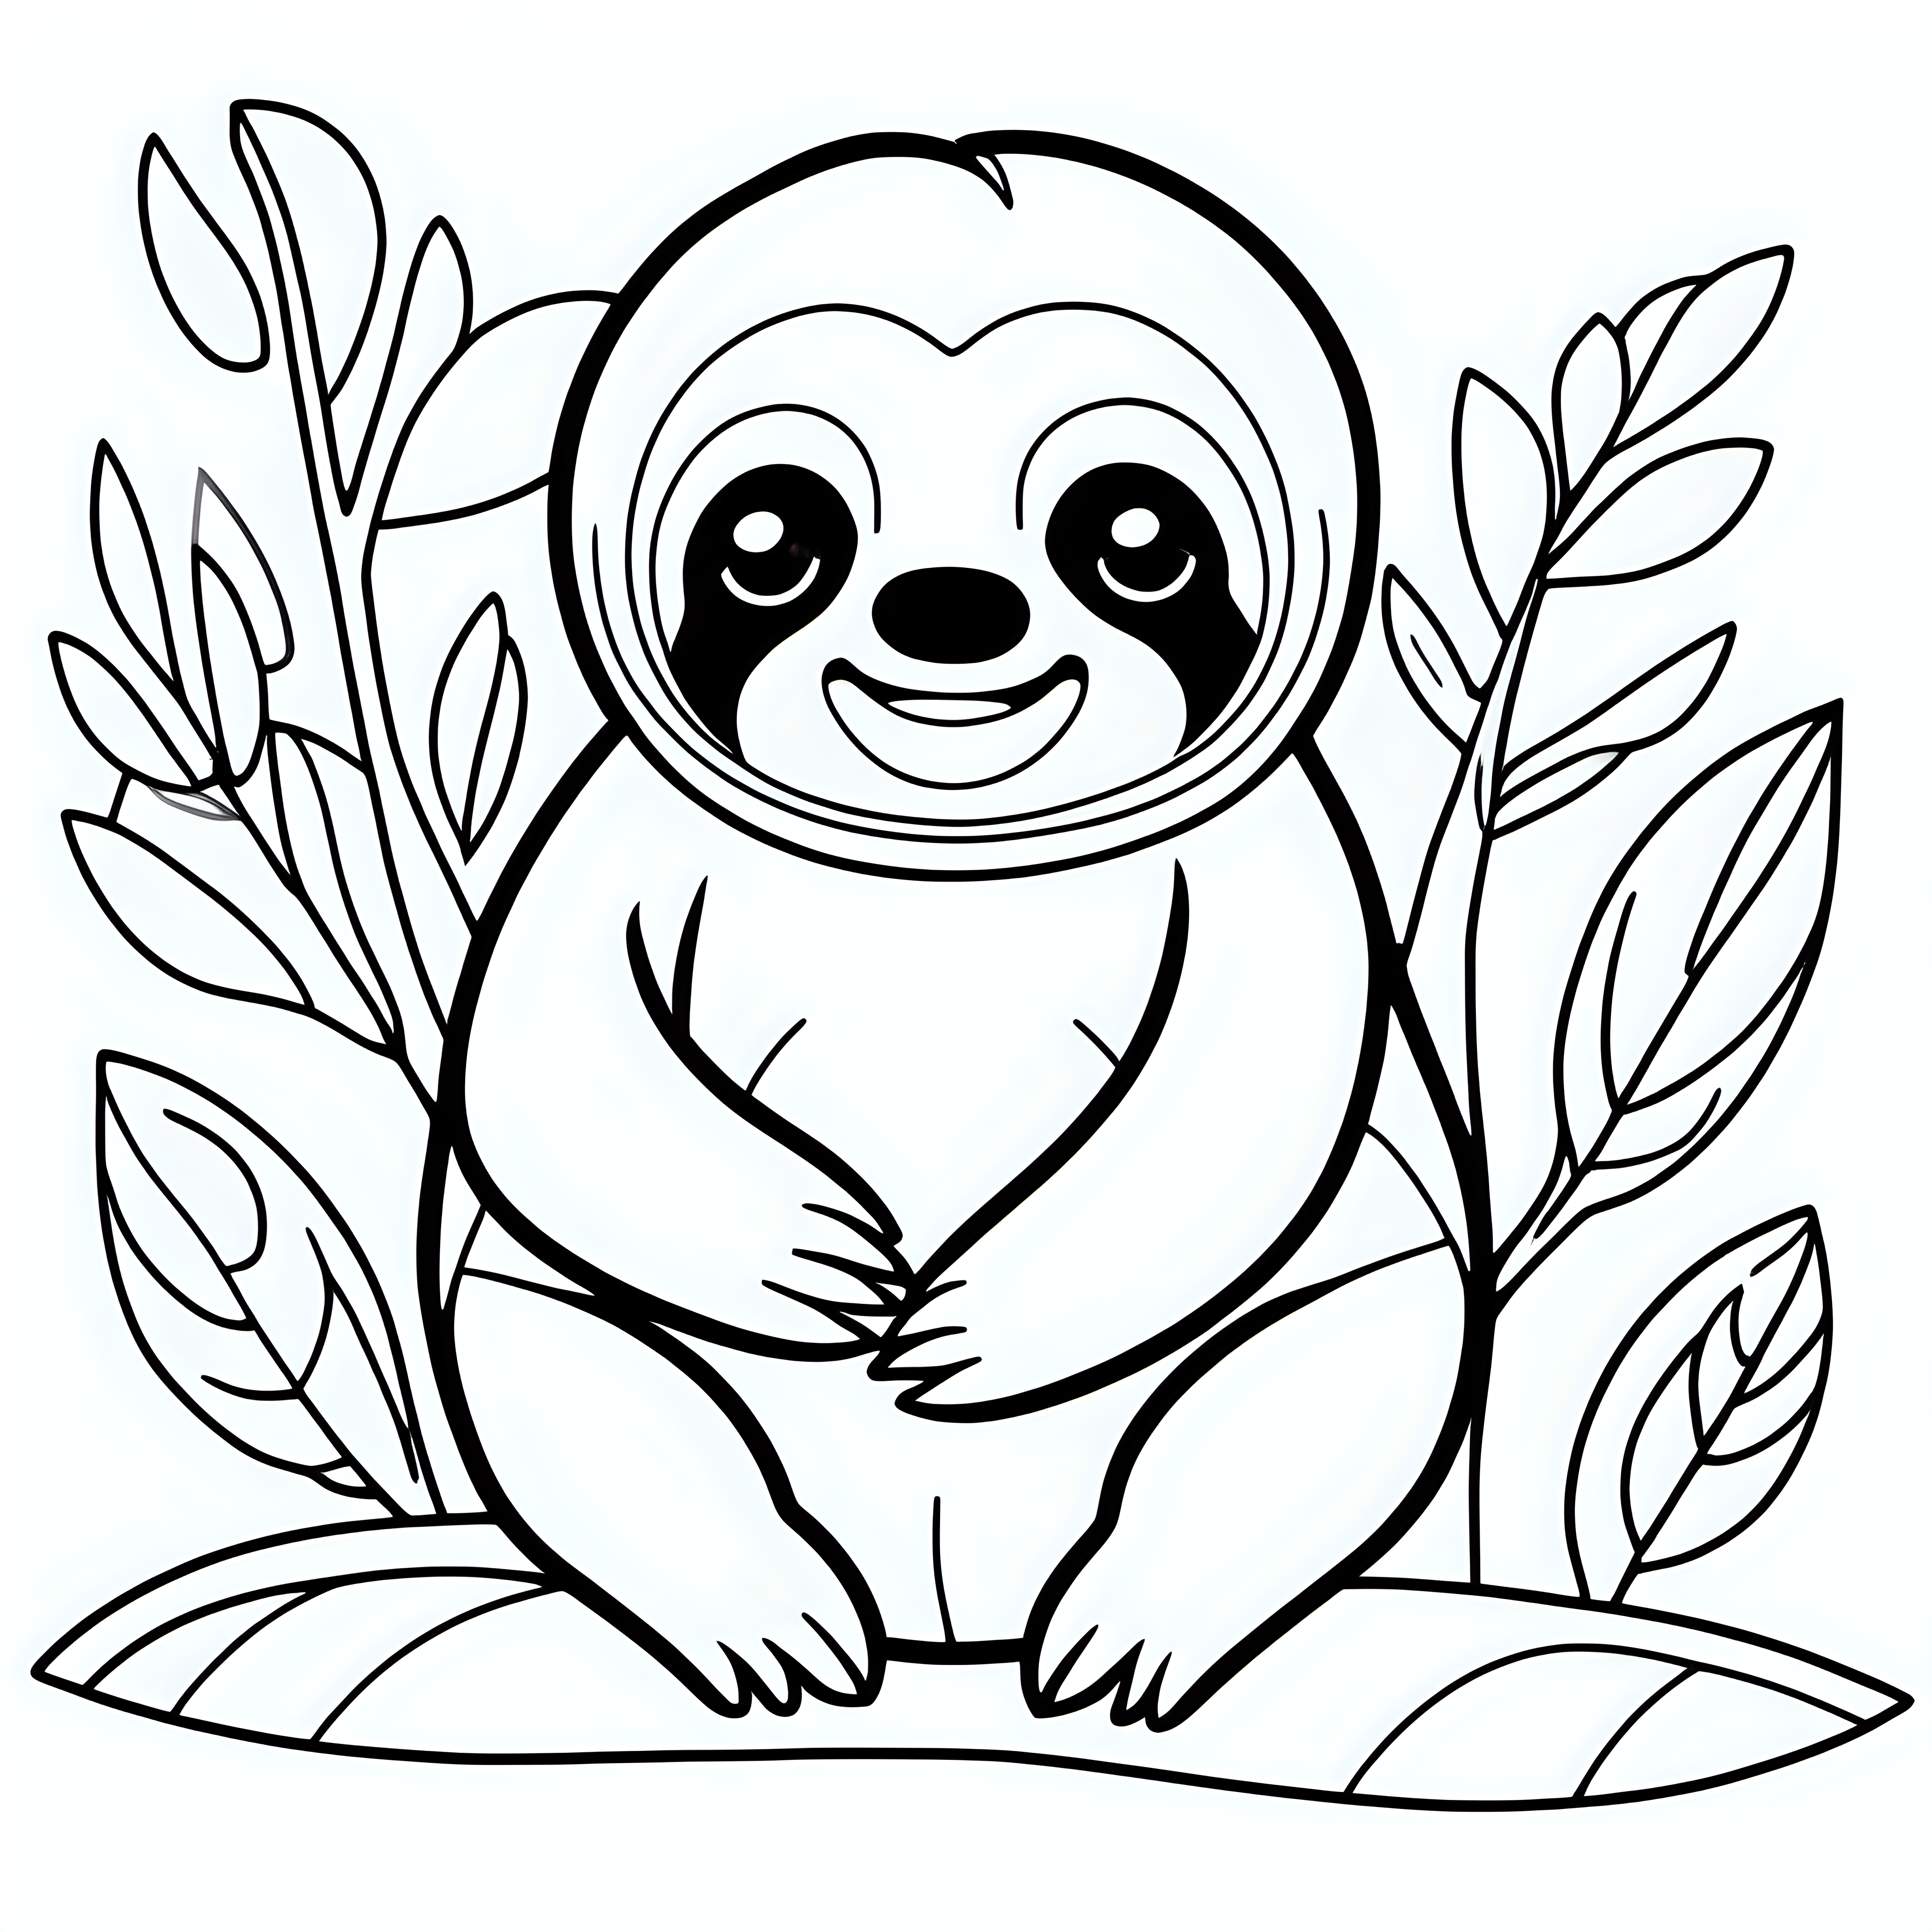 draw a cute Sloth with only the outline